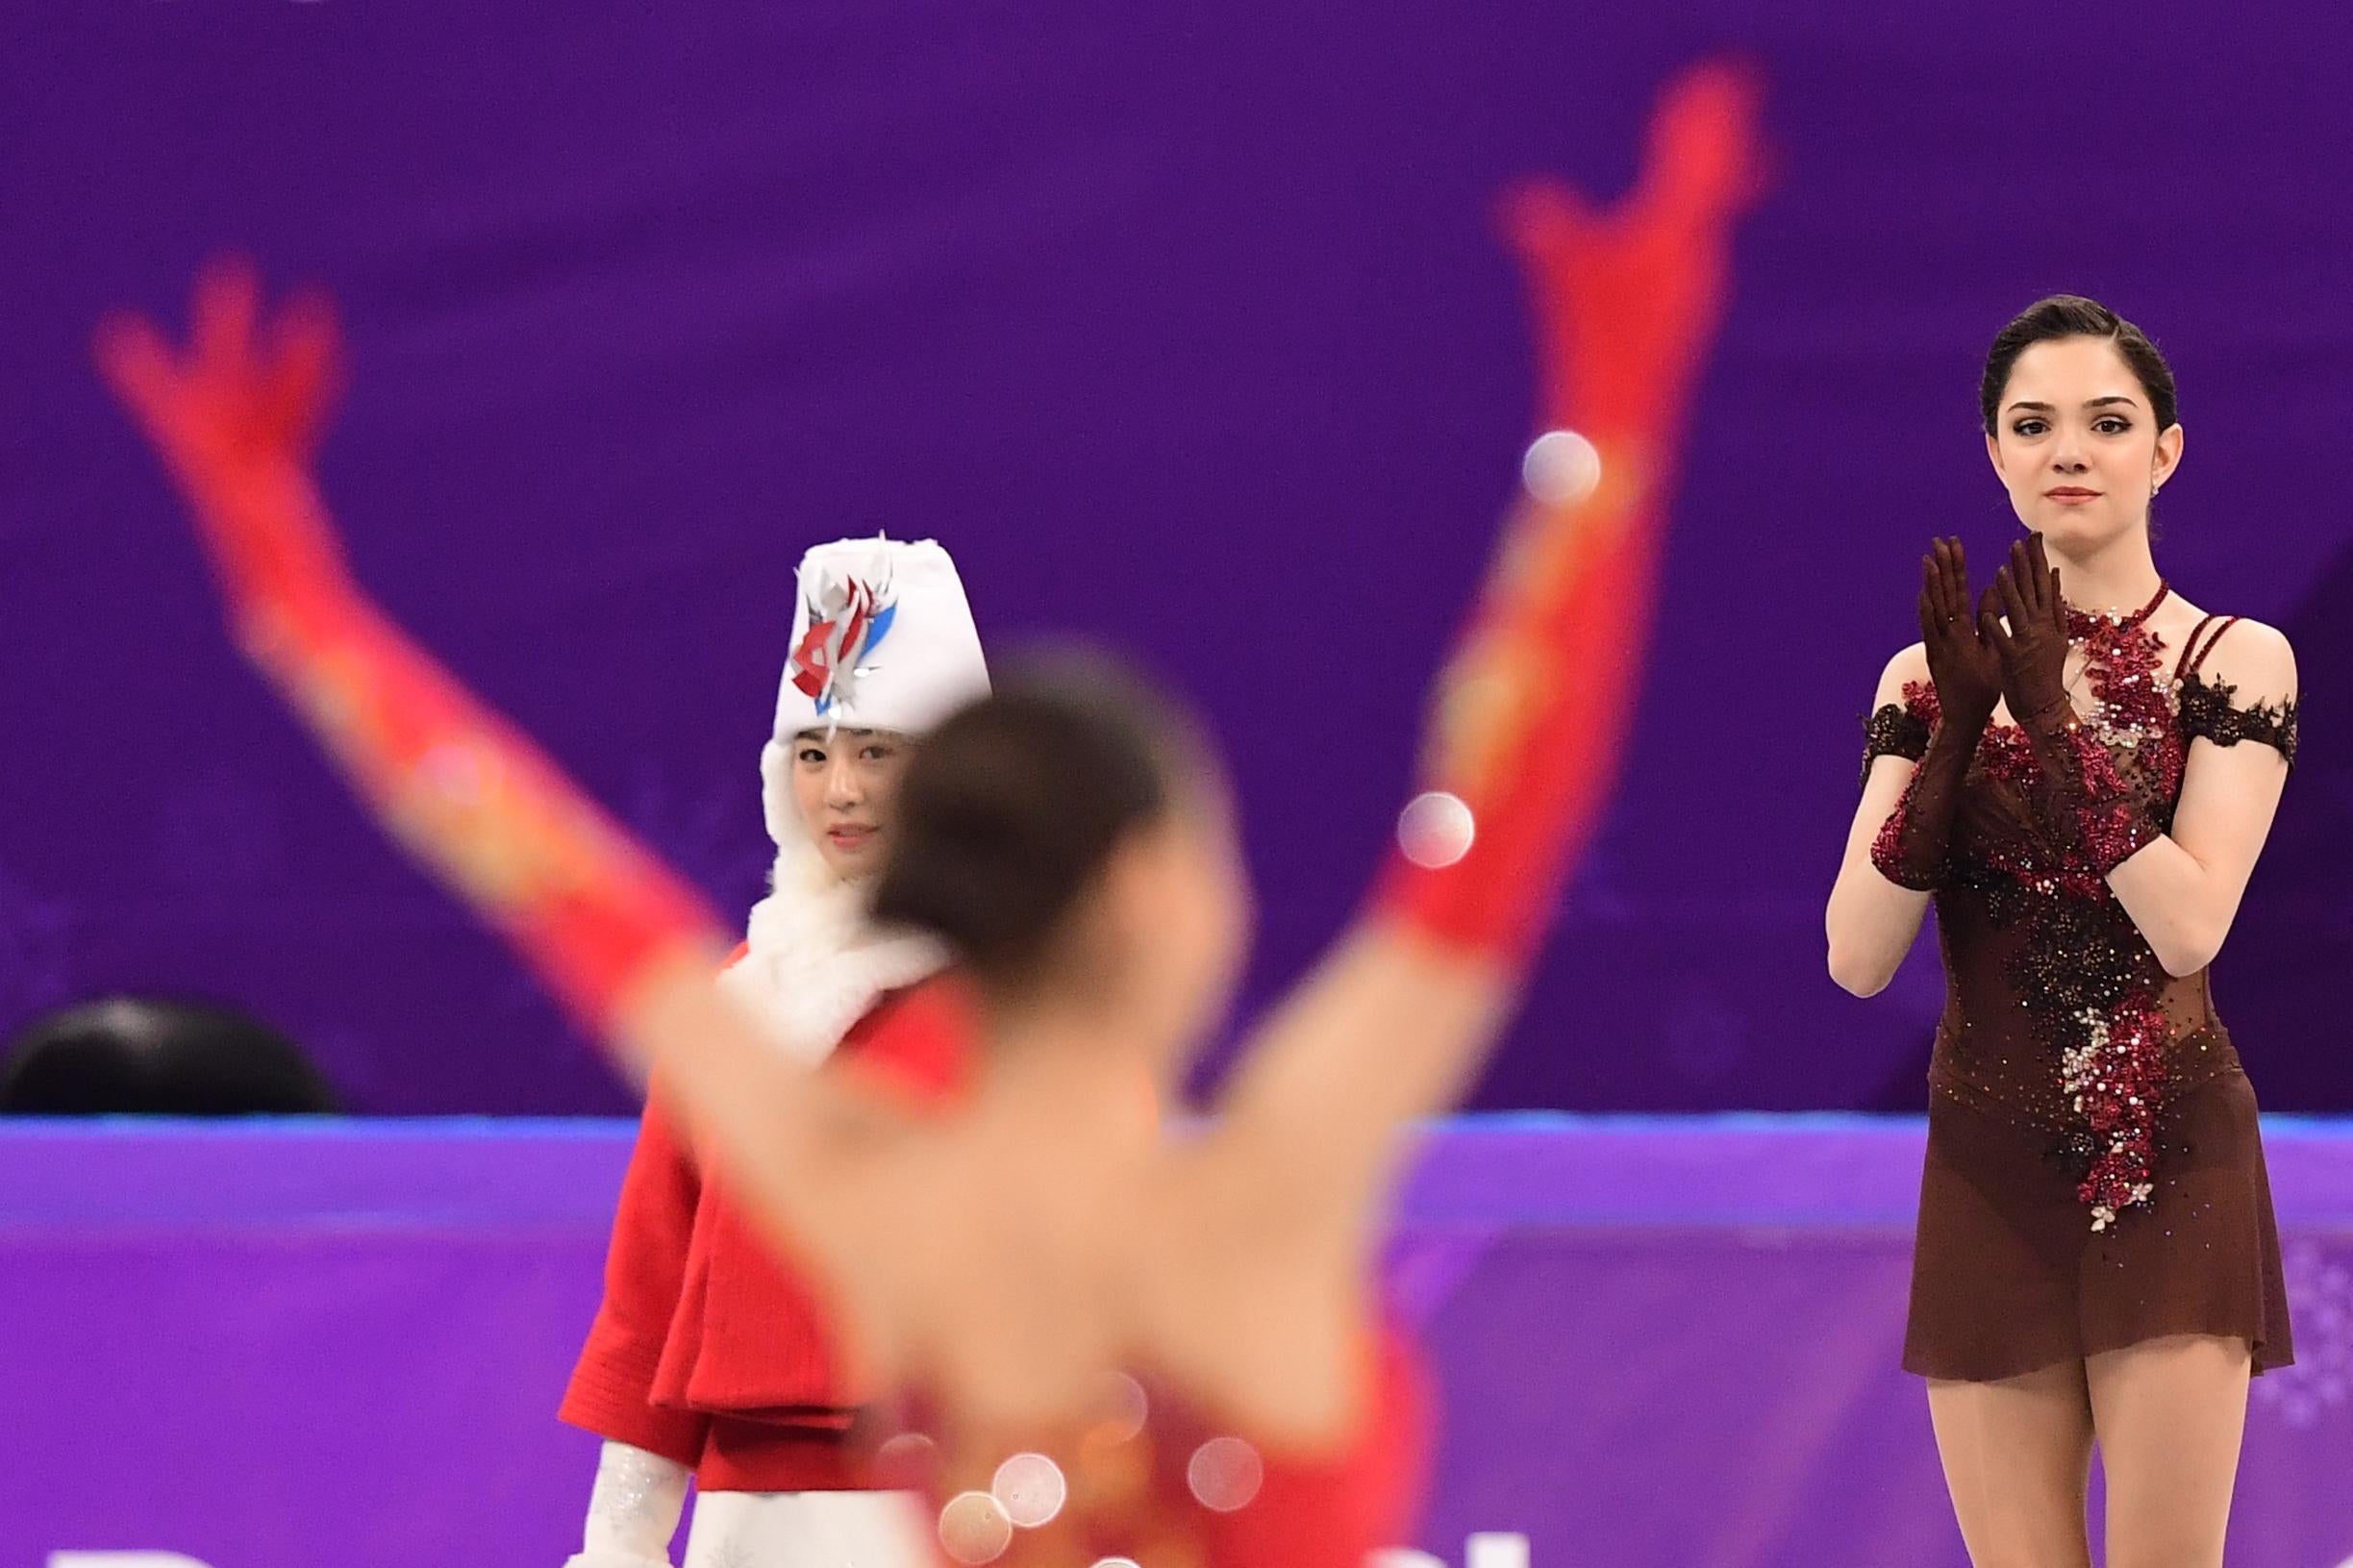 Gold medallist Russia’s Alina Zagitova celebrates (L) as silver medallist Russia’s Evgenia Medvedeva claps before the venue ceremony after the women’s single skating free skating of the figure skating event during the Pyeongchang 2018 Winter Olympic Games at the Gangneung Ice Arena in Gangneung on February 23, 2018.